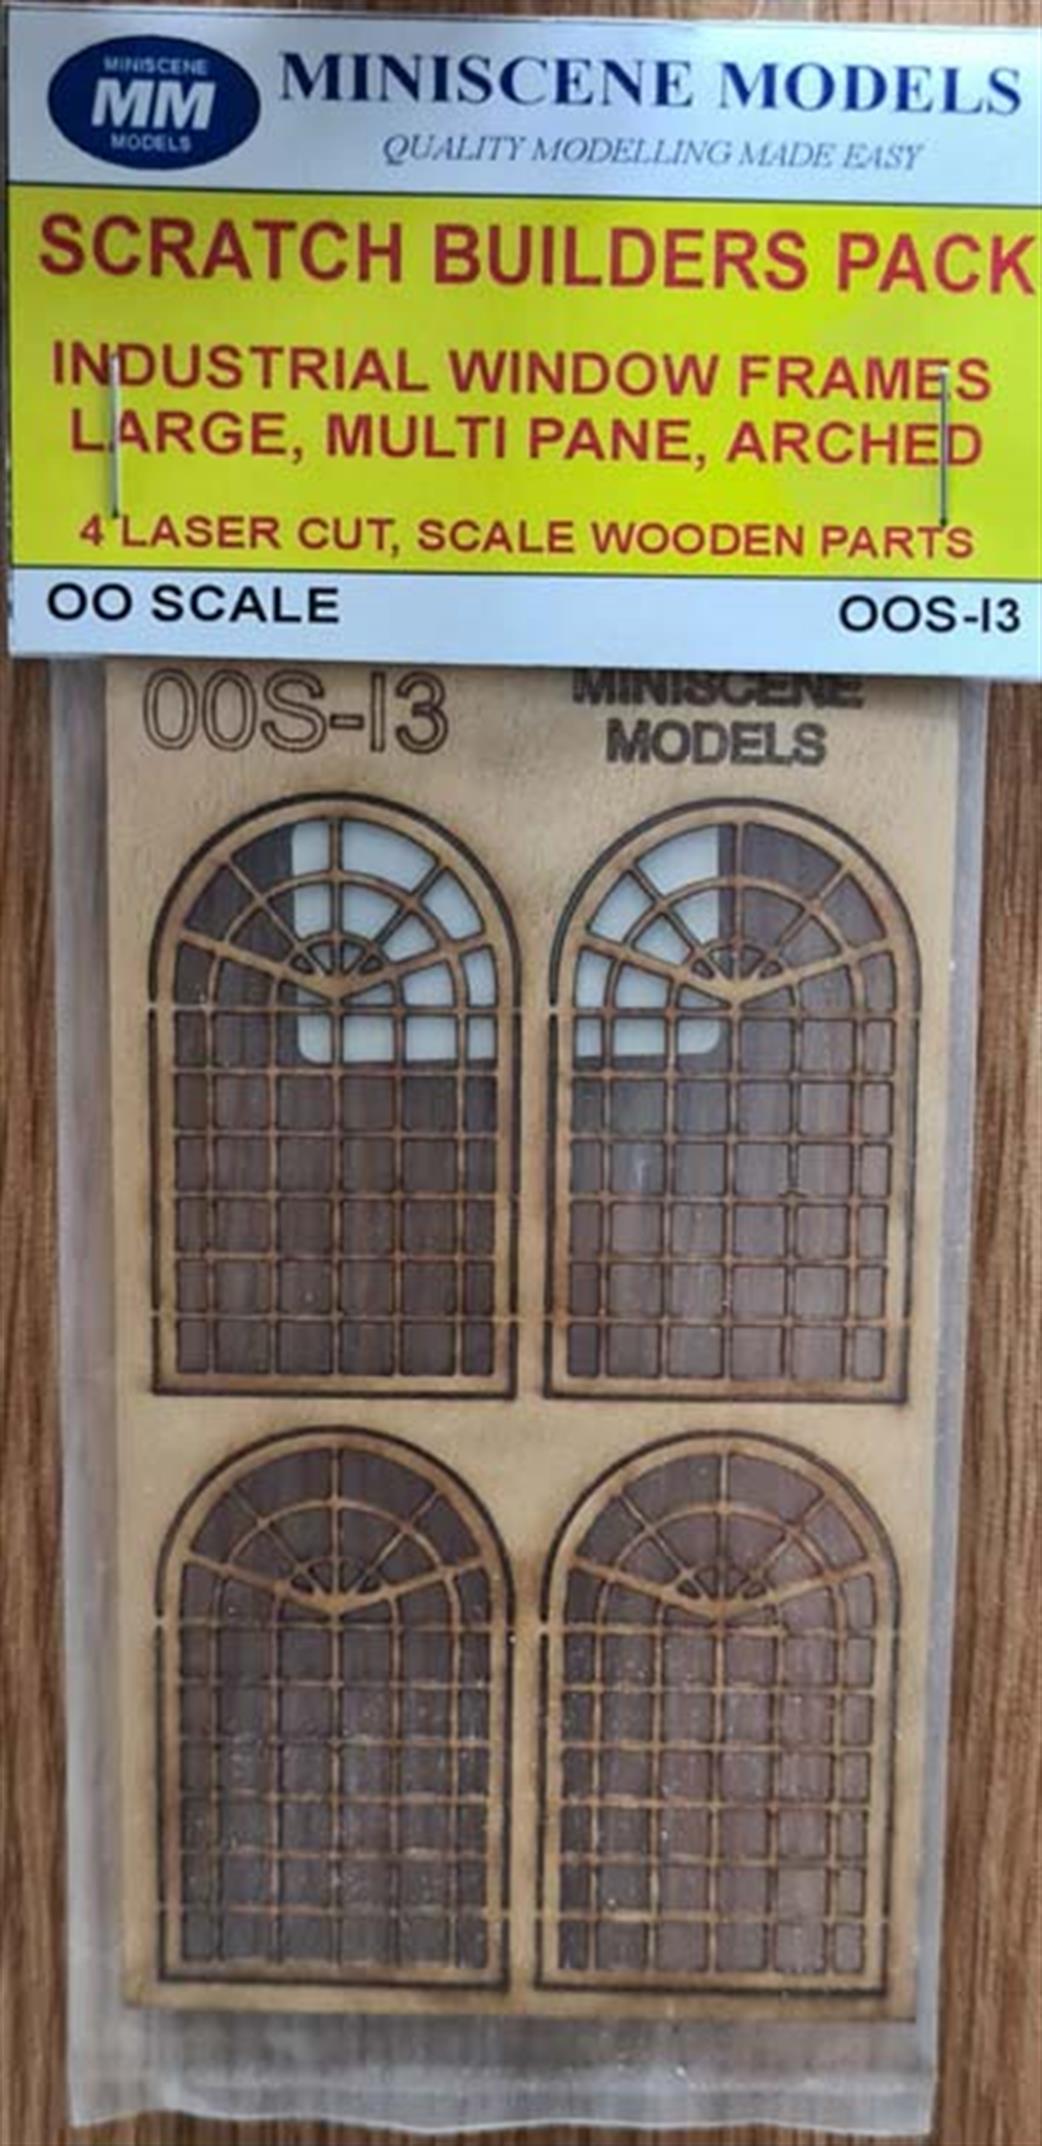 Ancorton Models OOS-13 Large, Multi-Pane, Arched Window Frames OO